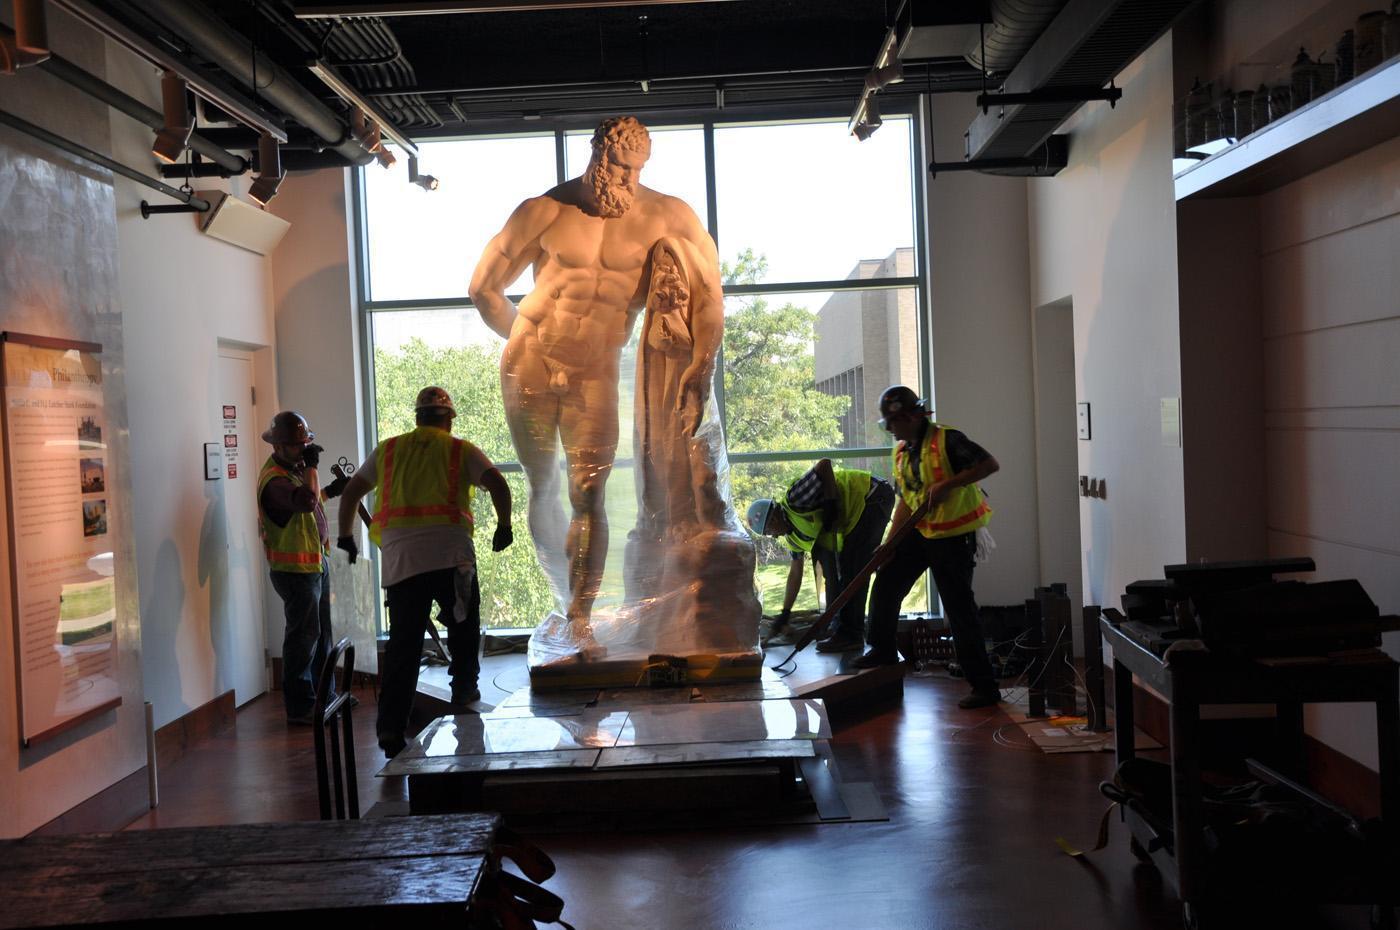 Front view of the statue of the Farnese Hercules wrapped and being moved, while four men work on it, in the main lobby.